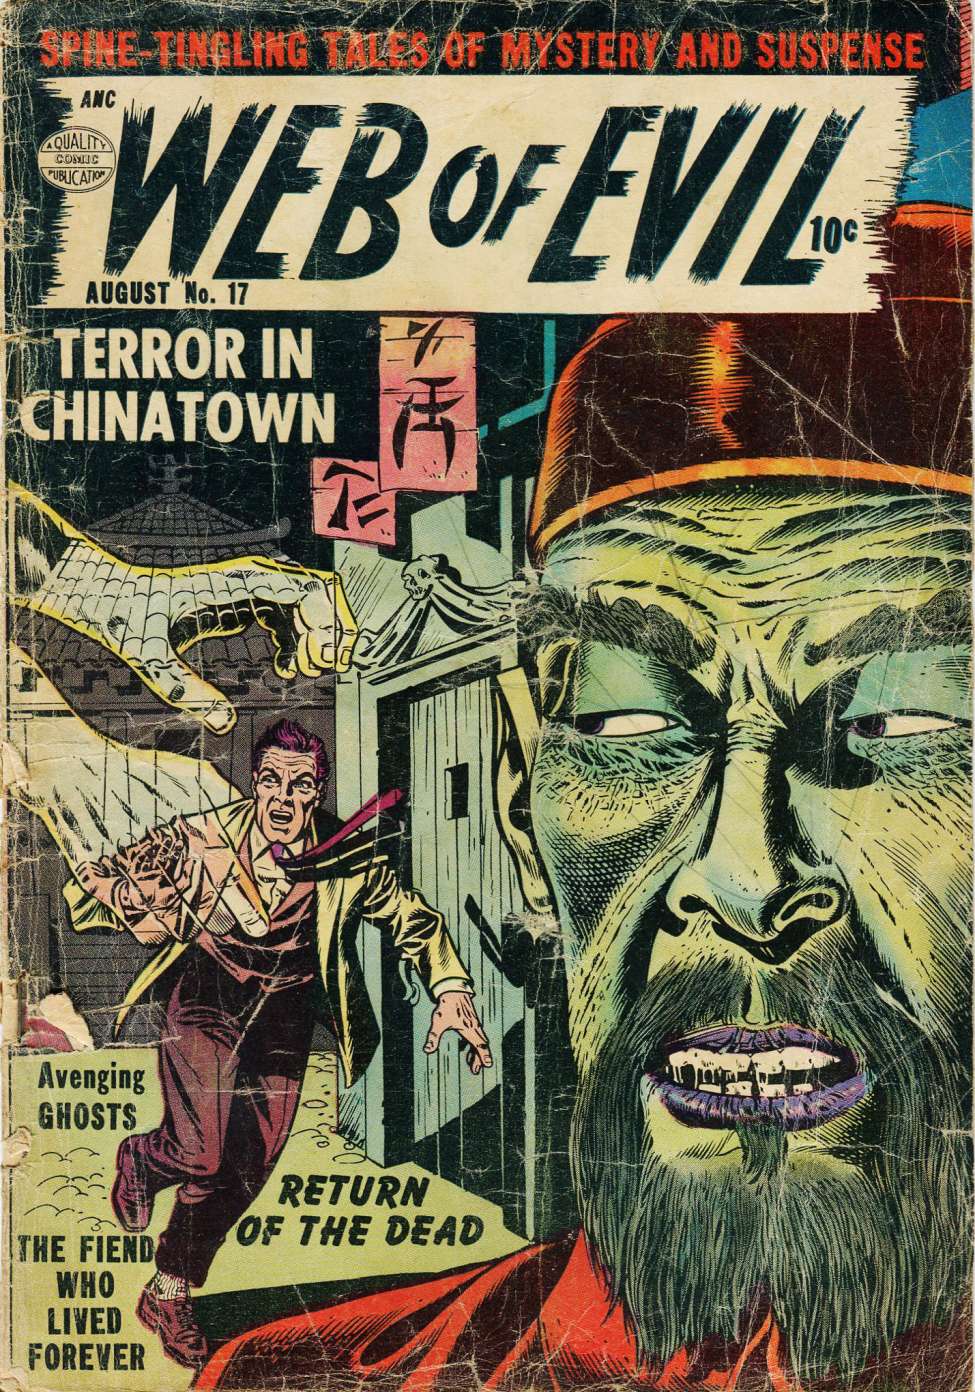 Comic Book Cover For Web of Evil 17